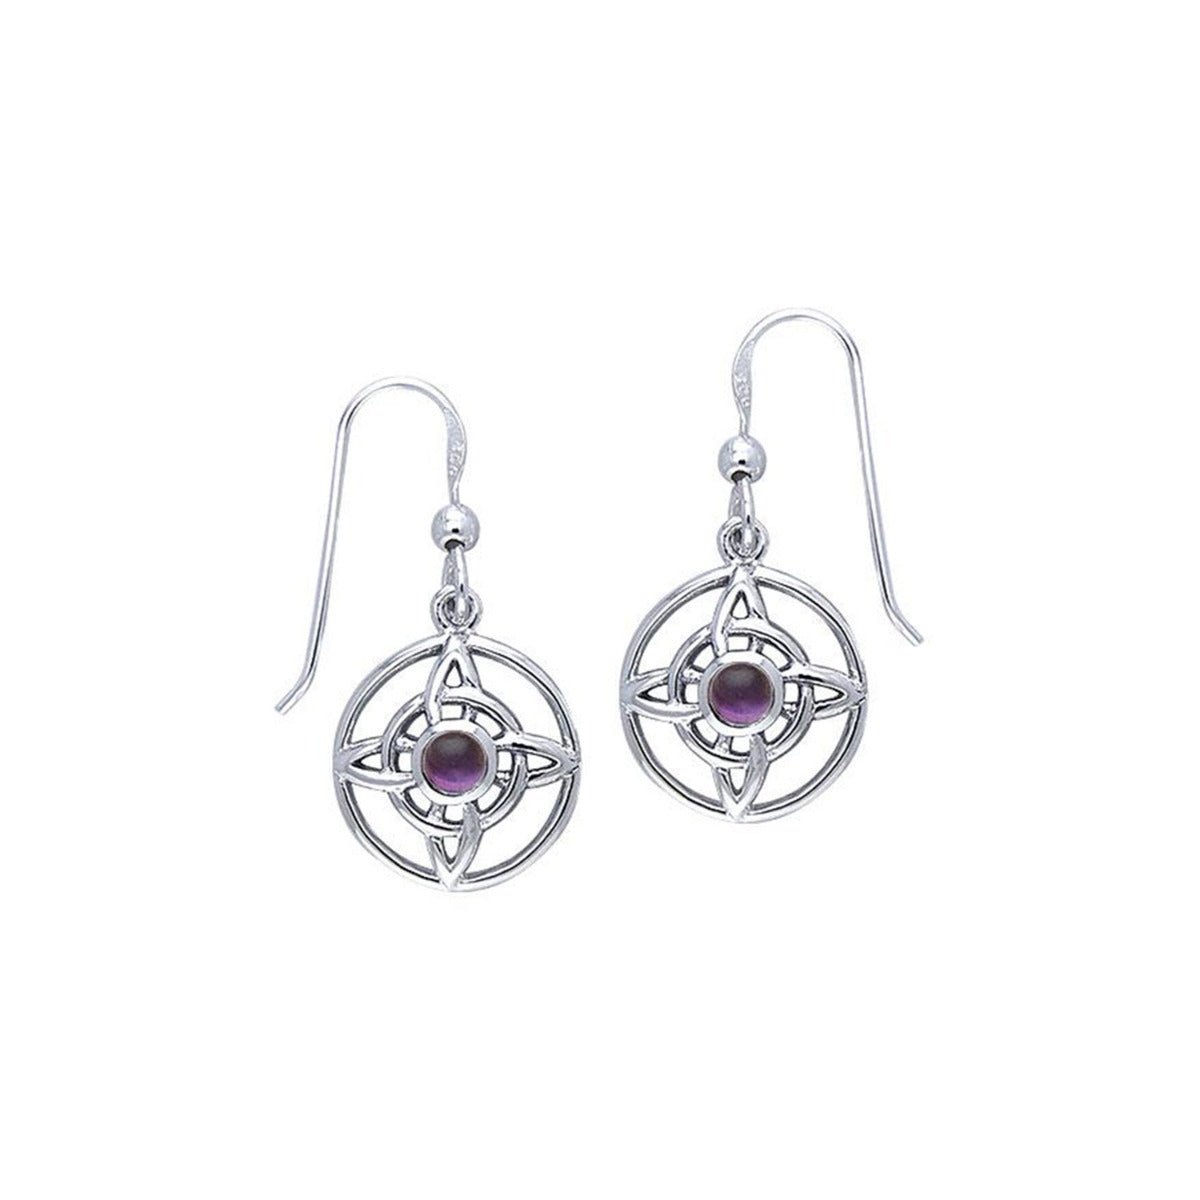 Witches Protection Earrings with Amethyst - 13 Moons